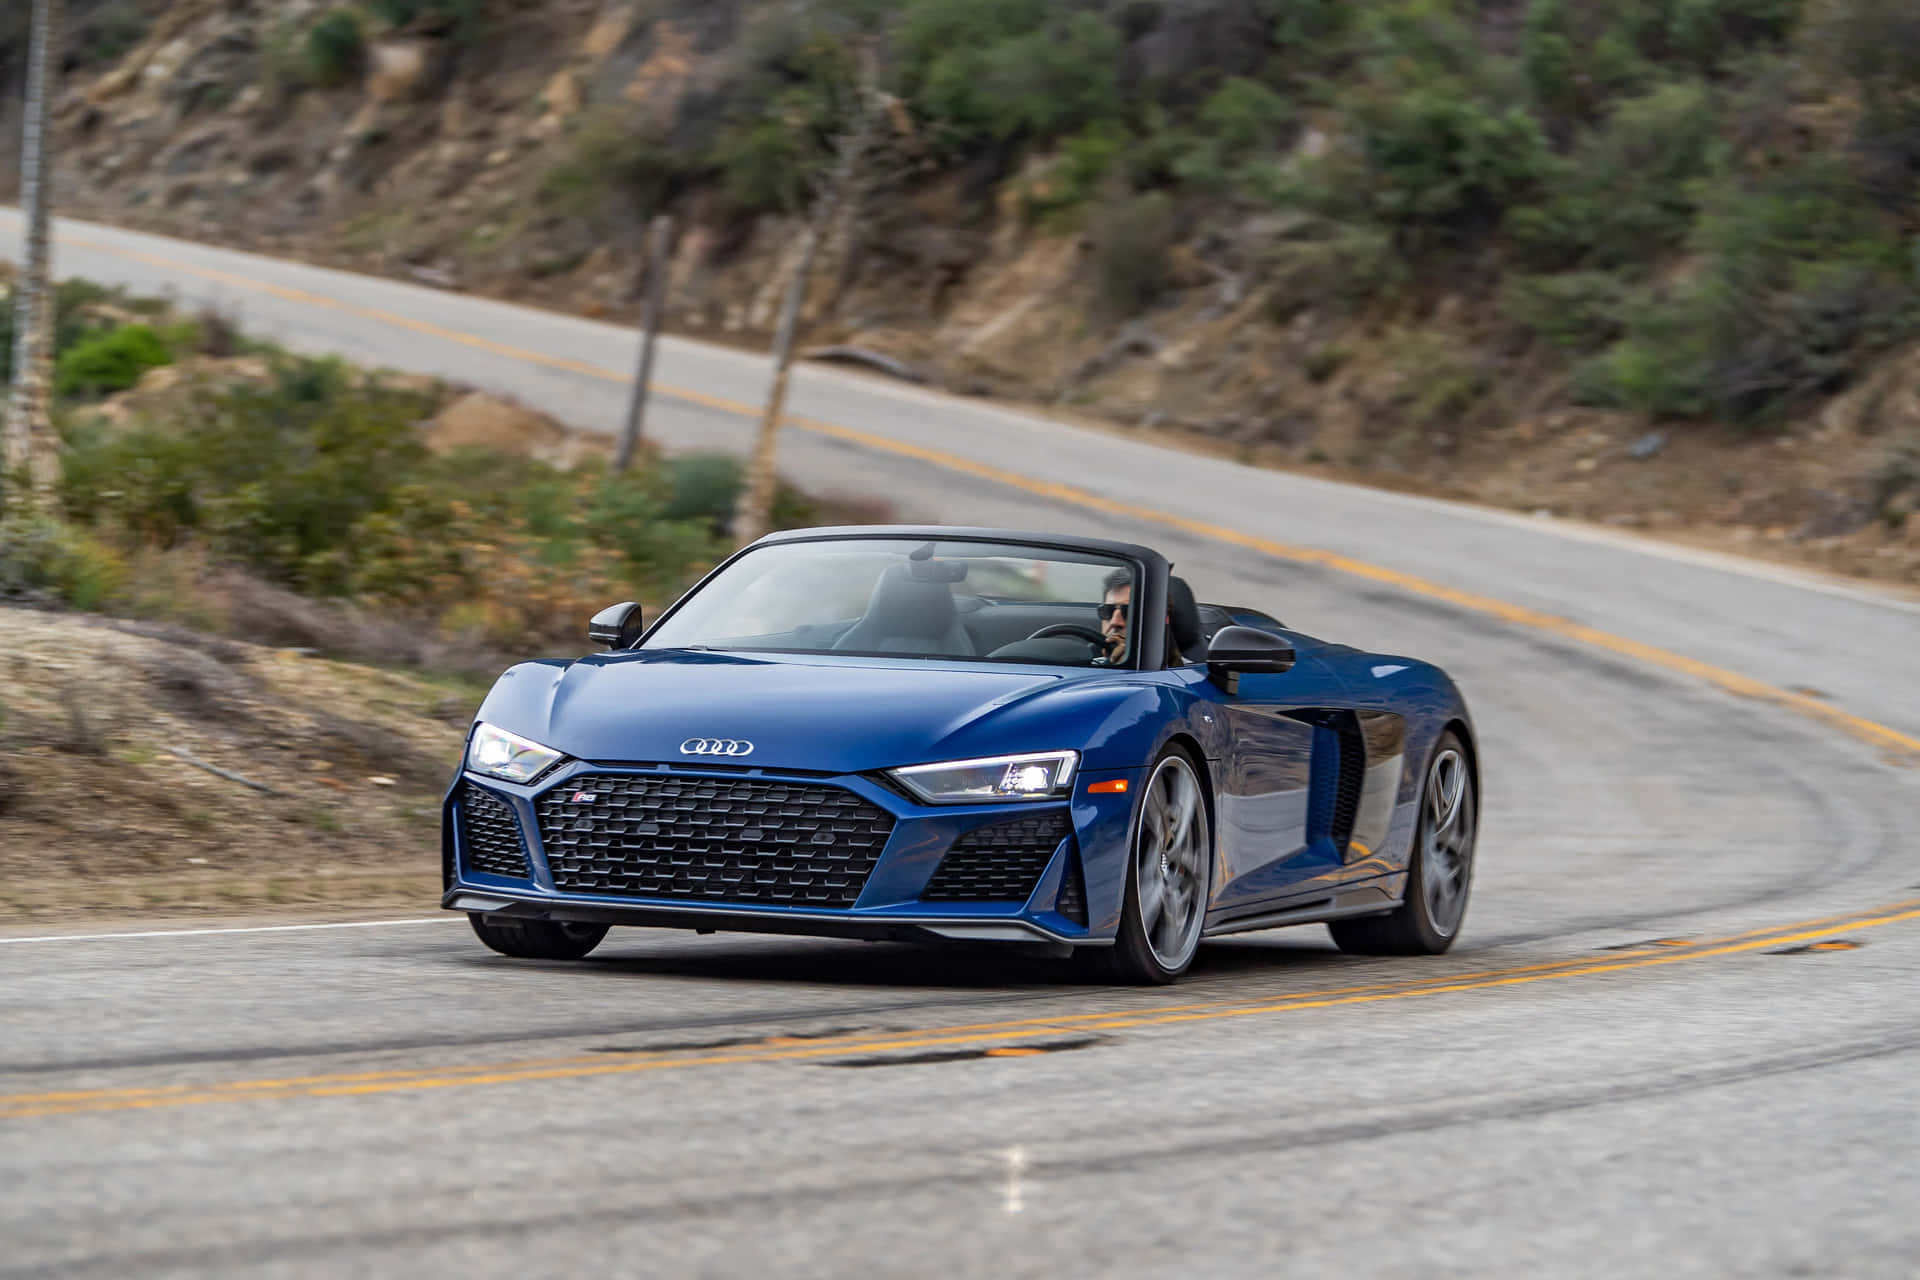 Feast Your Eyes On This Powerful Audi Supercar